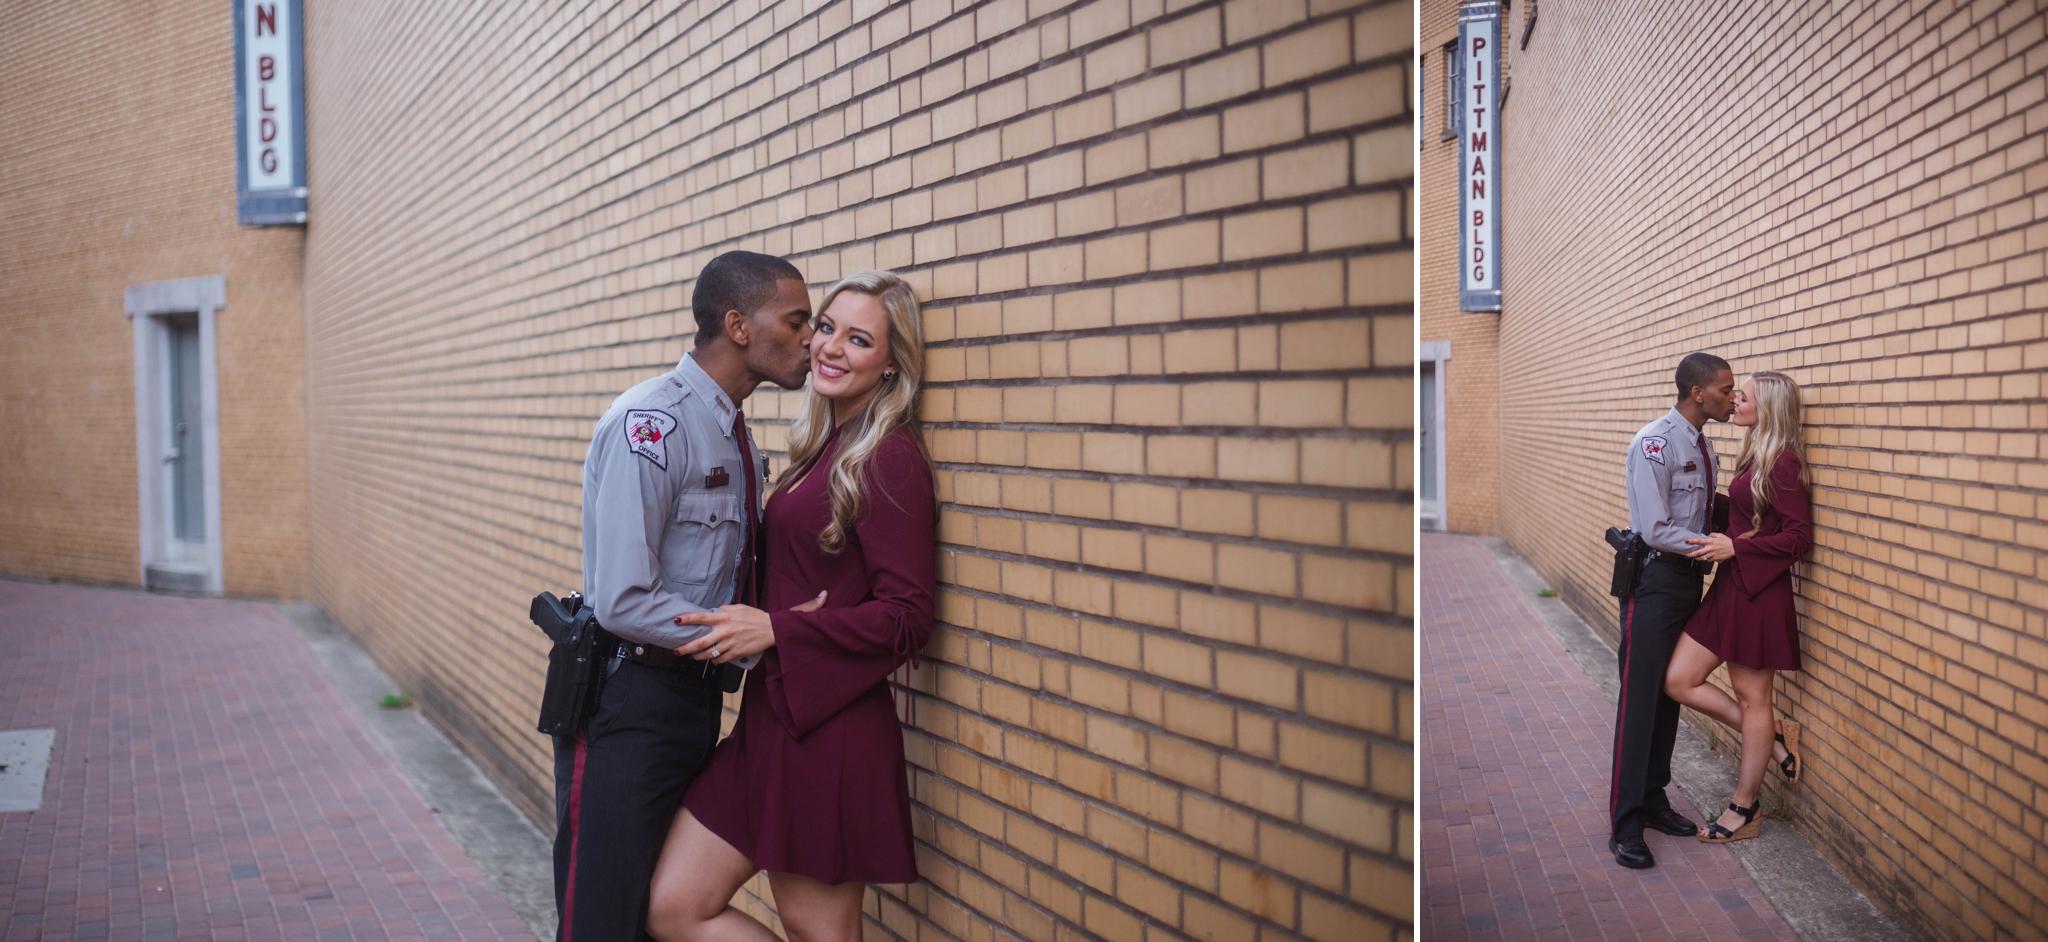 Engagement Photography in Downtown Fayetteville North Carolina